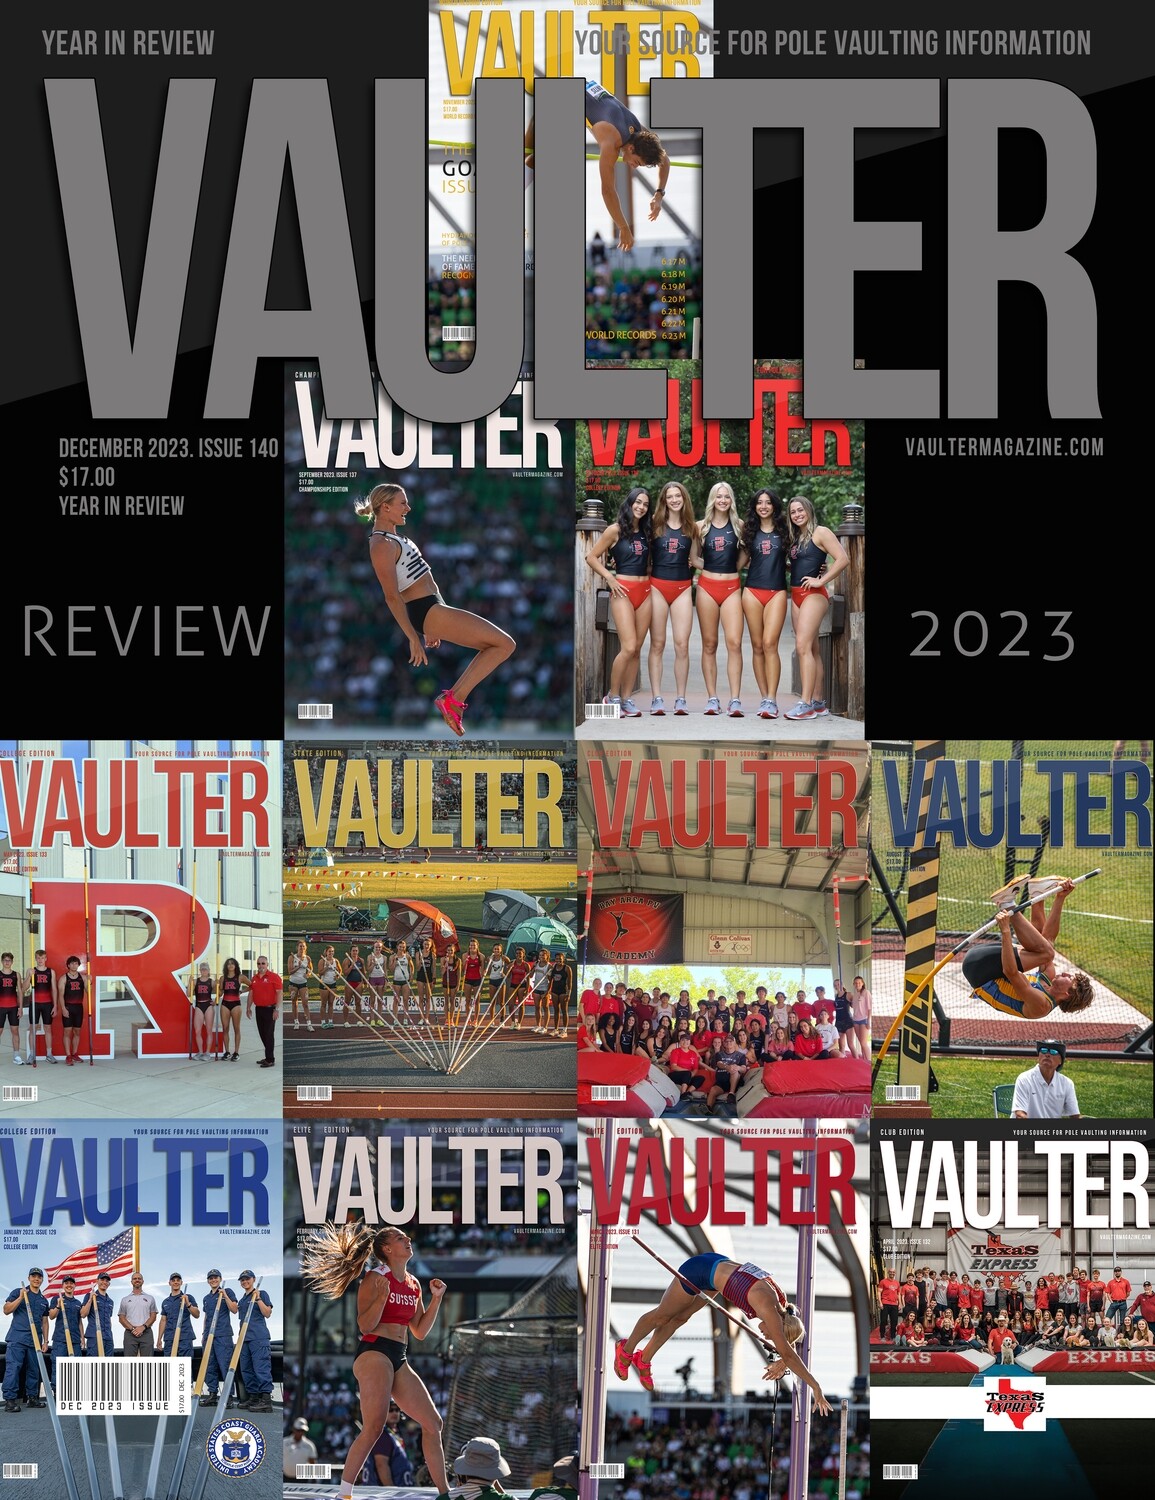 December 2023 year in review Issue of Vaulter Magazine U.S. Standard Mail